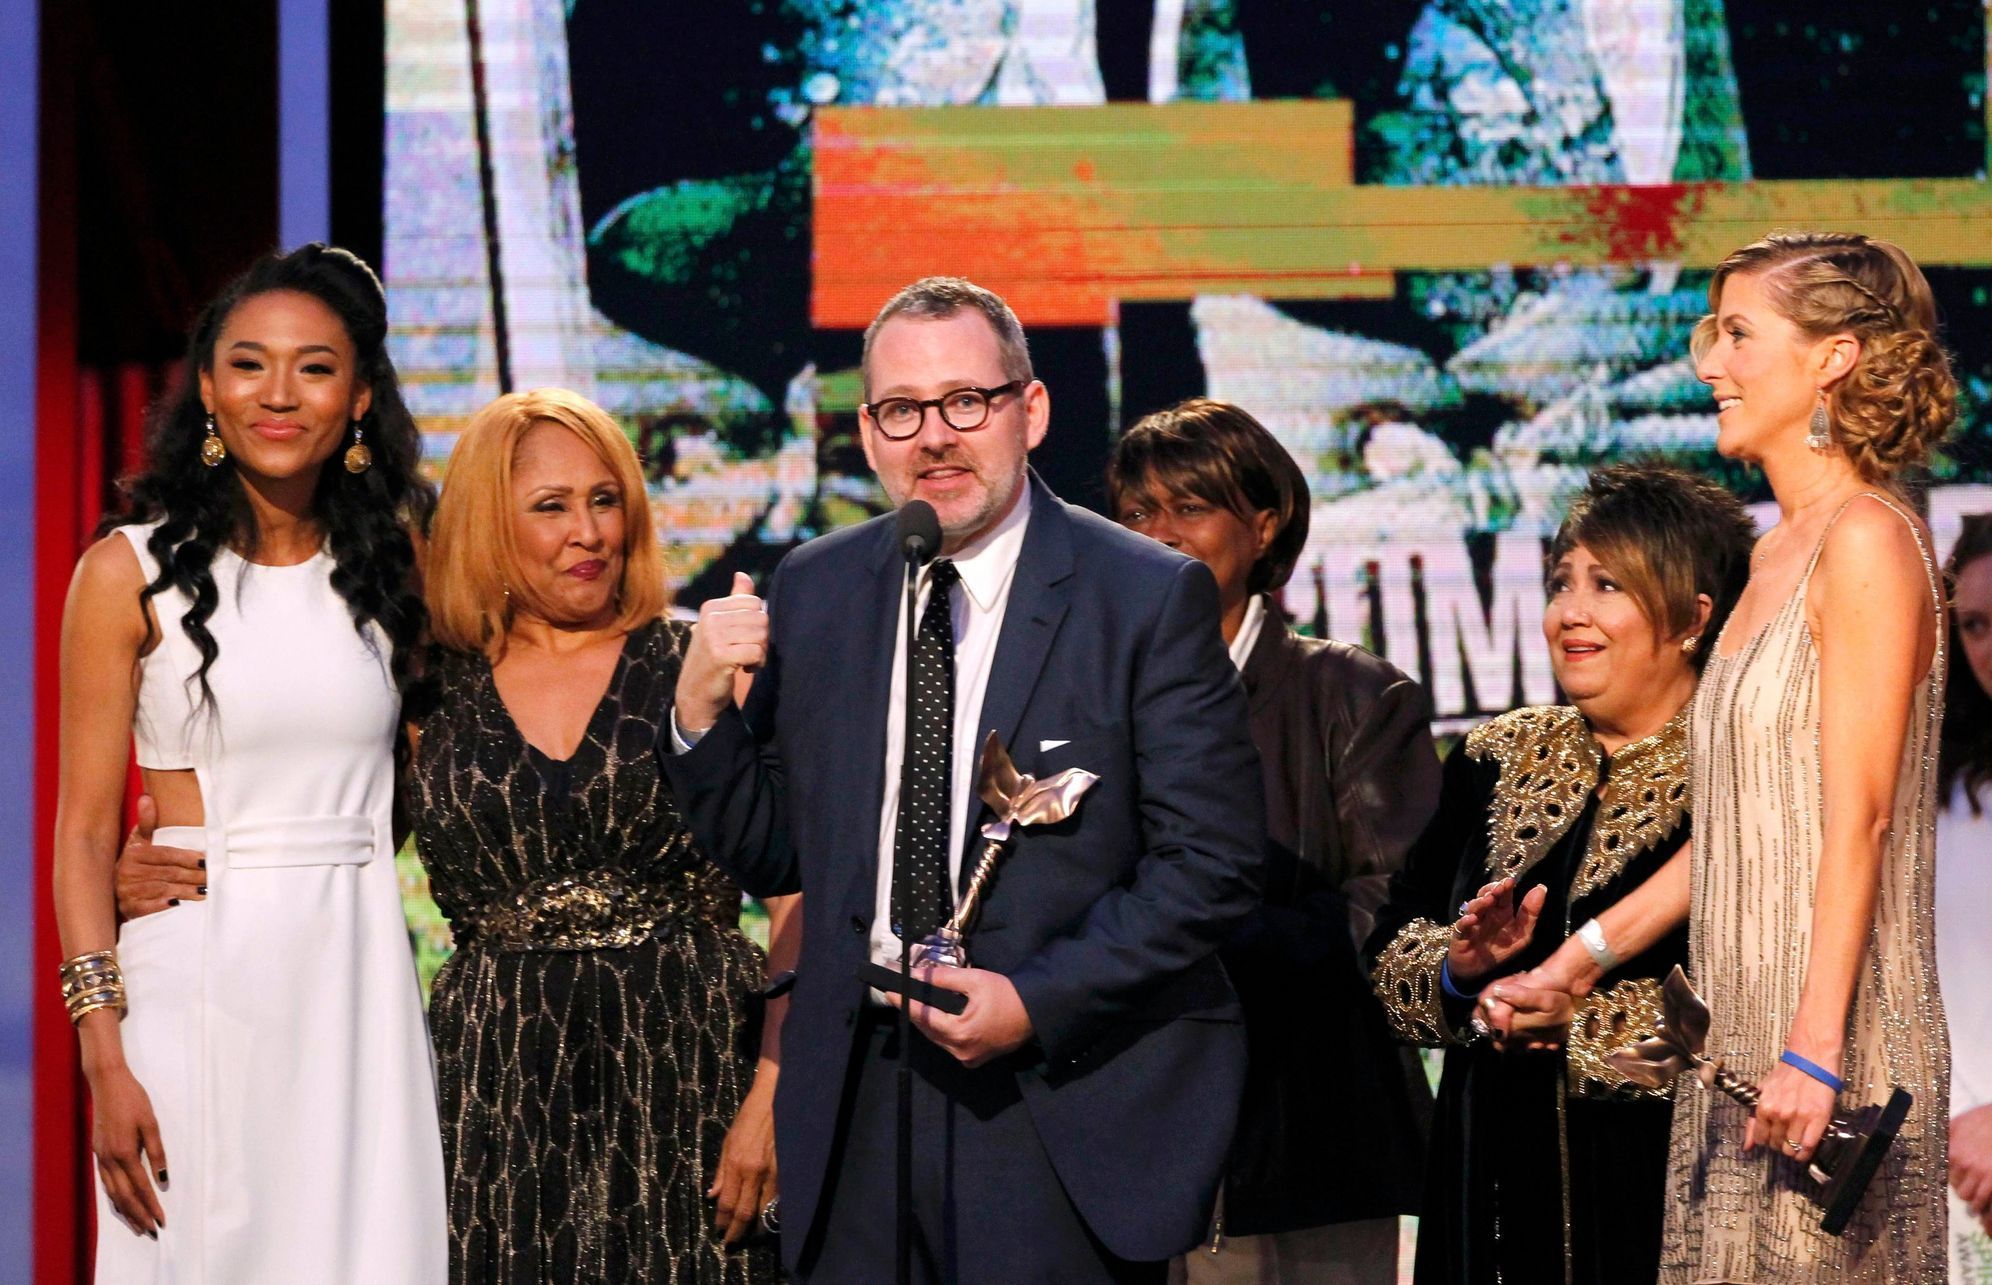 Director Morgan Neville with the cast of &quot;20 Feet from Stardom&quot; accepts the best documentary award at the 2014 Film Independent Spirit Awards in Santa Monica